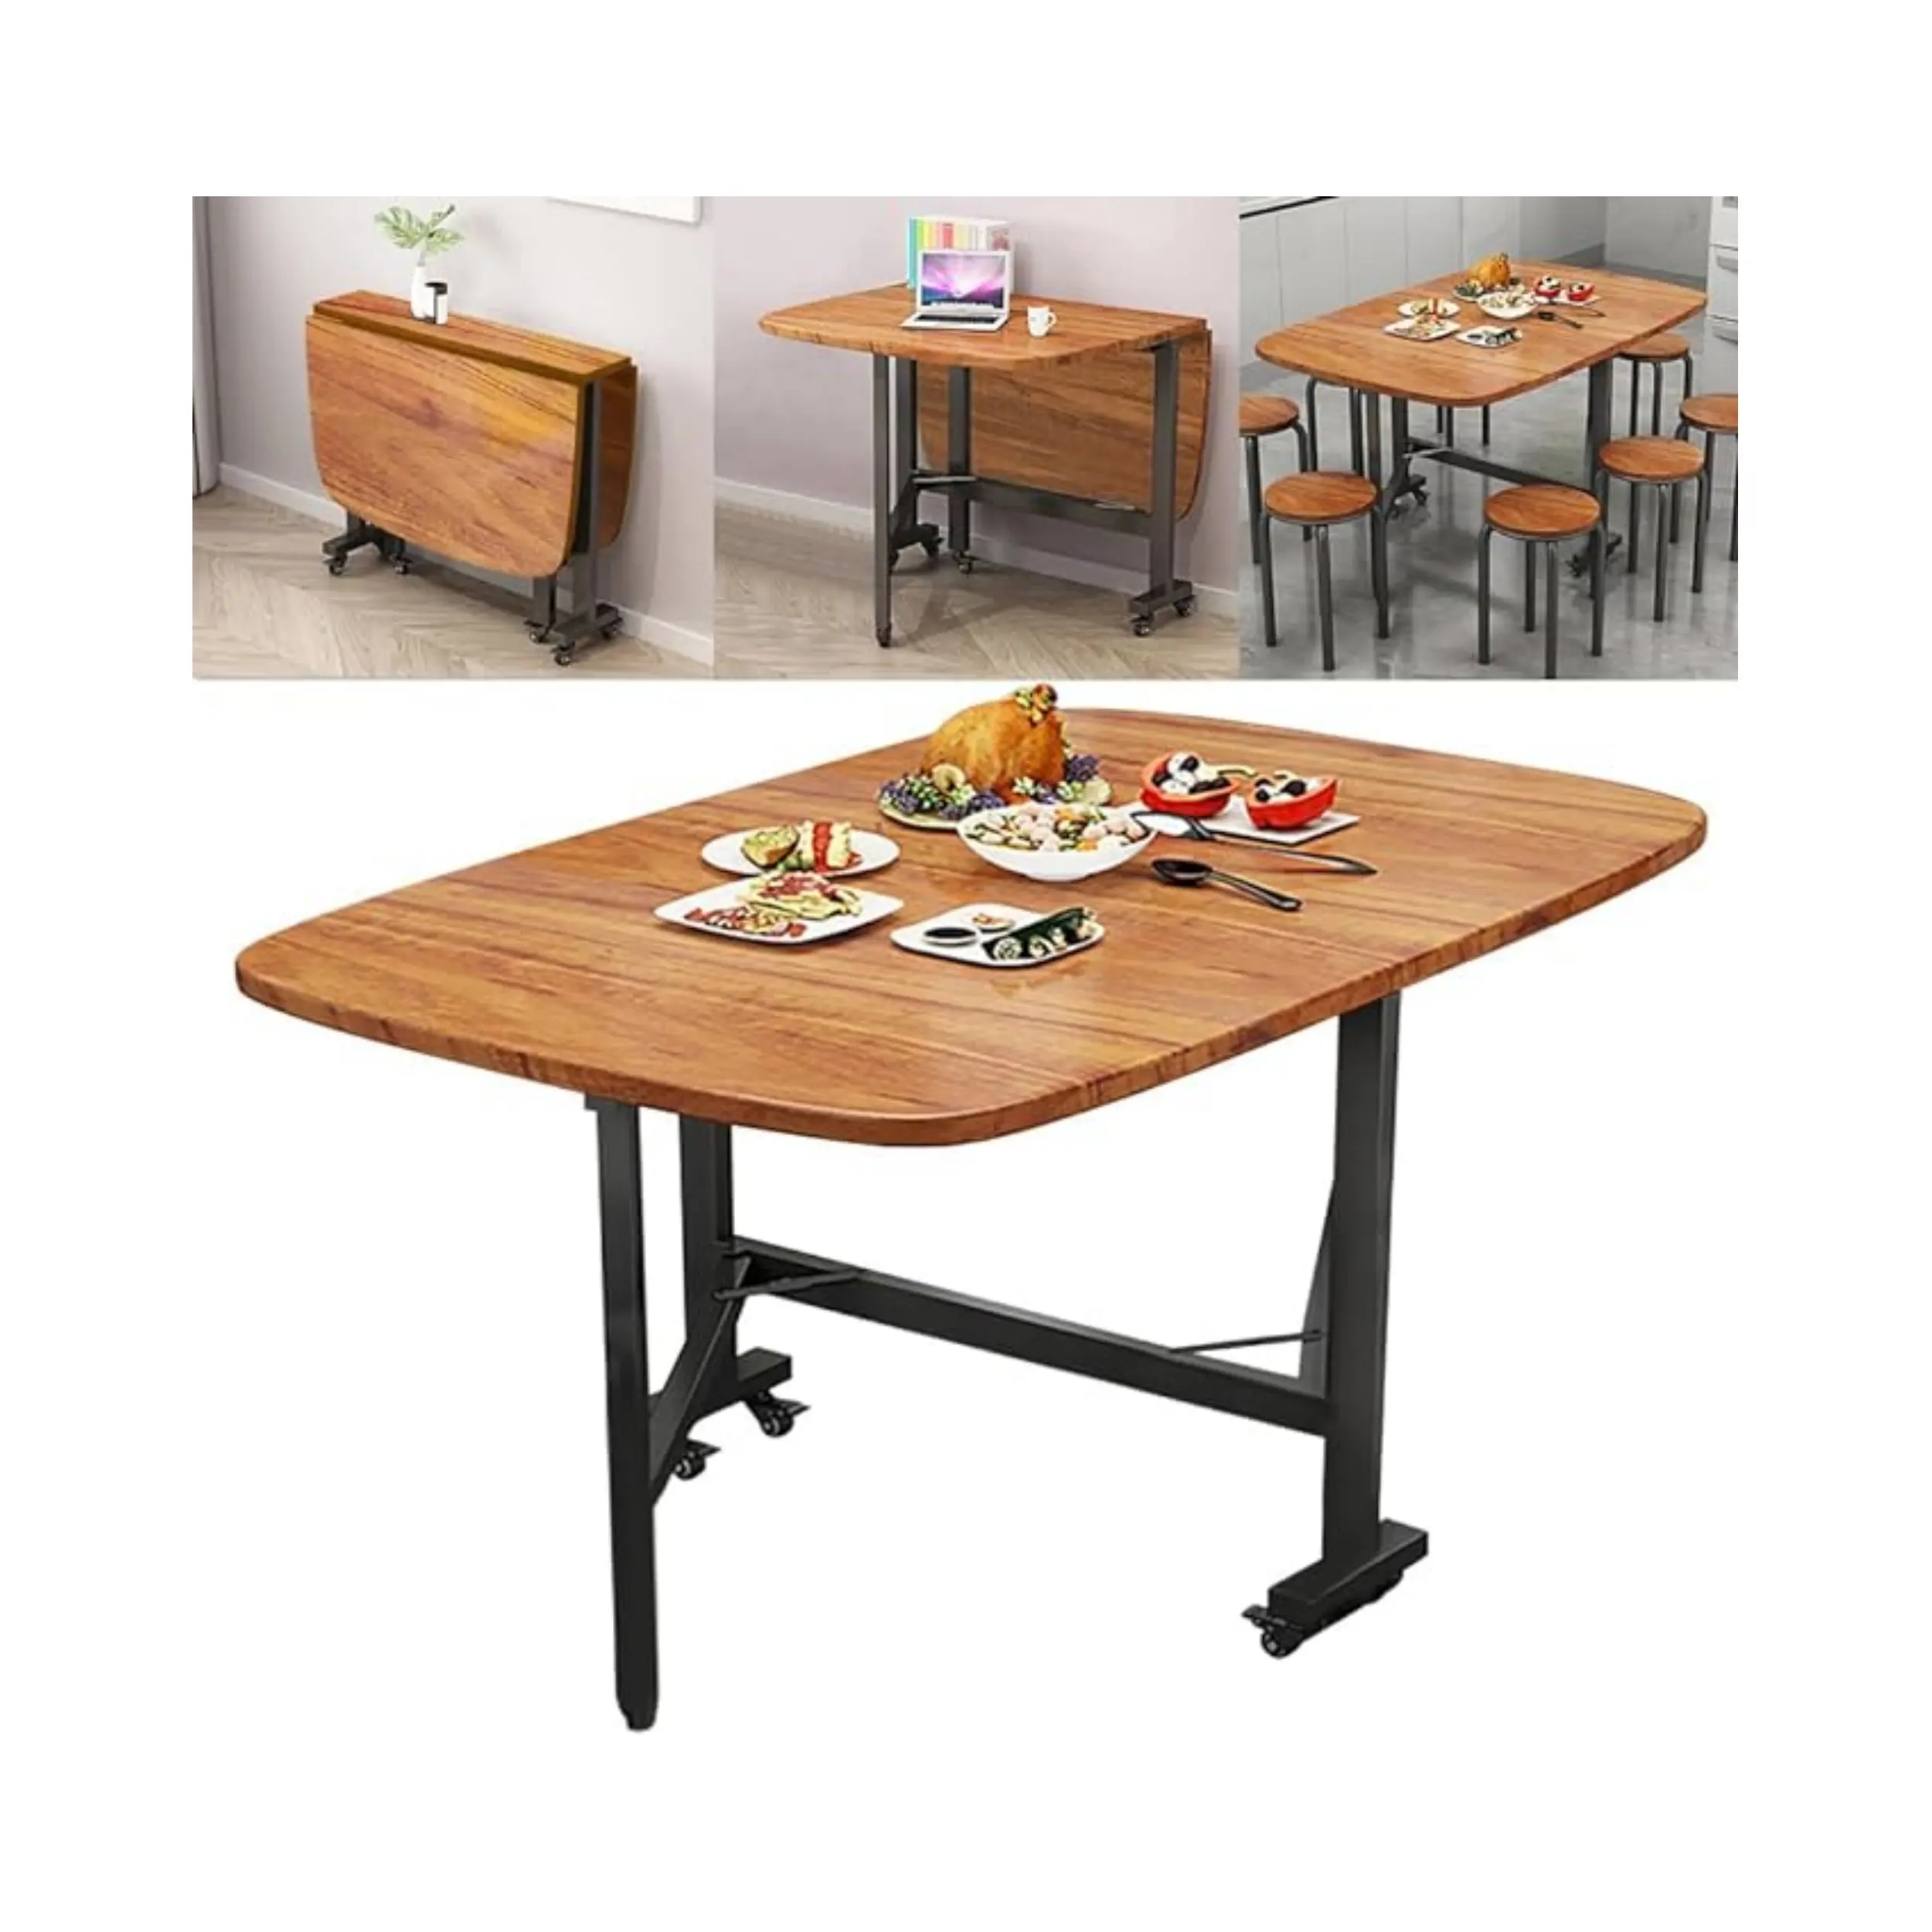 Diner supplies wooden dining tables Modern Wooden Cheap Furniture with fold up